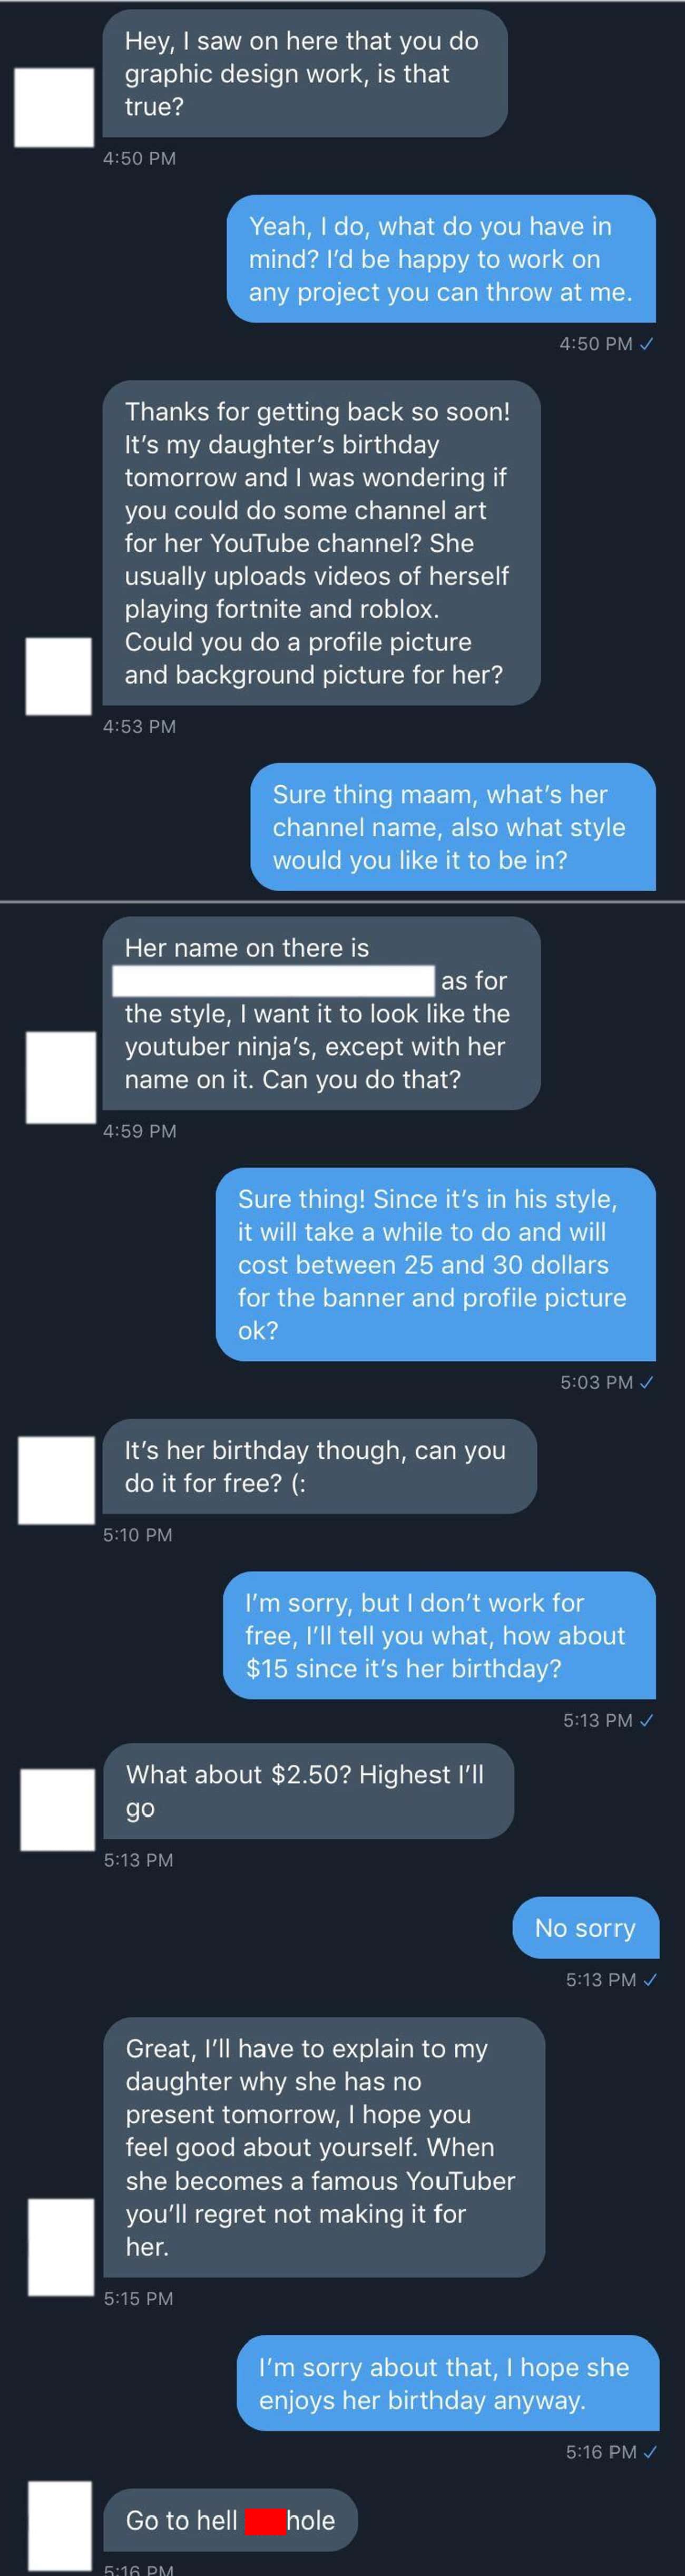 Graphic Design Client Doesn't Want To Pay Because It's Her Daughter's Birthday